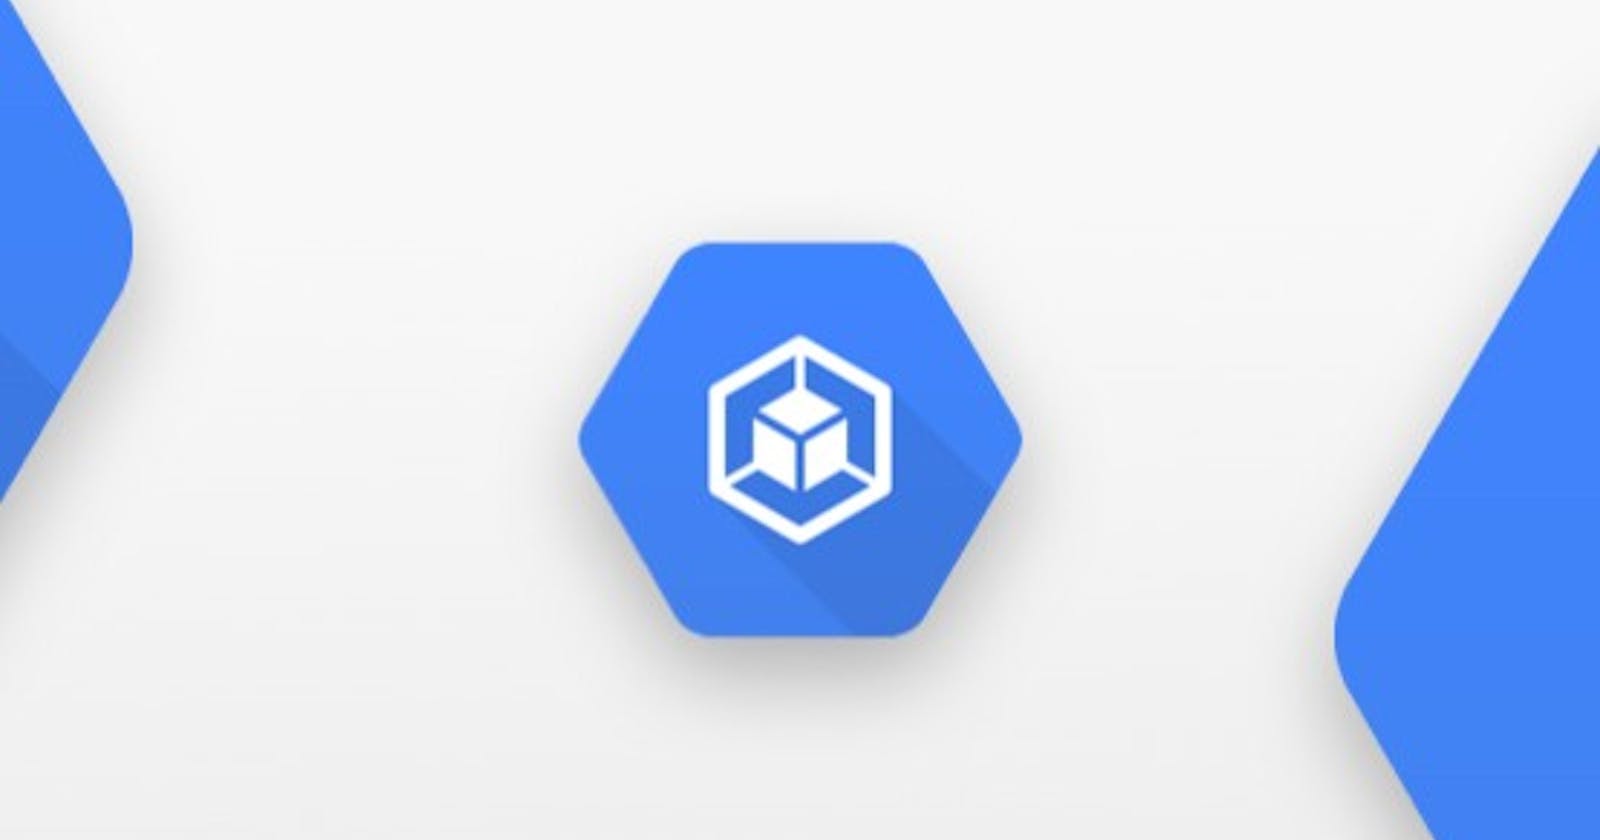 Deploying a Simple HTML Page on Google Kubernetes Engine (GKE) - Step-by-Step Guide